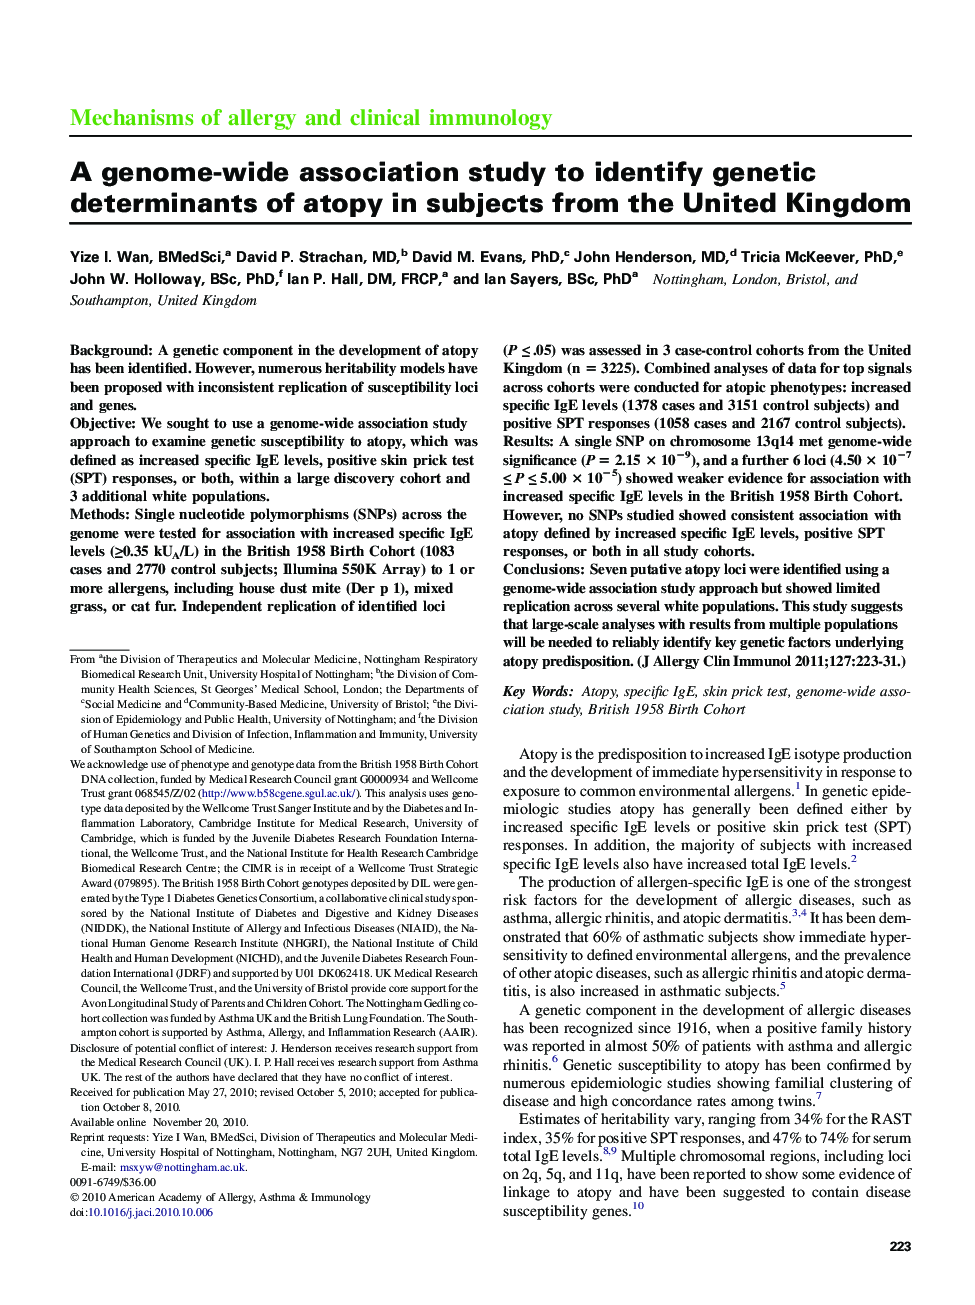 A genome-wide association study to identify genetic determinants of atopy in subjects from the United Kingdom